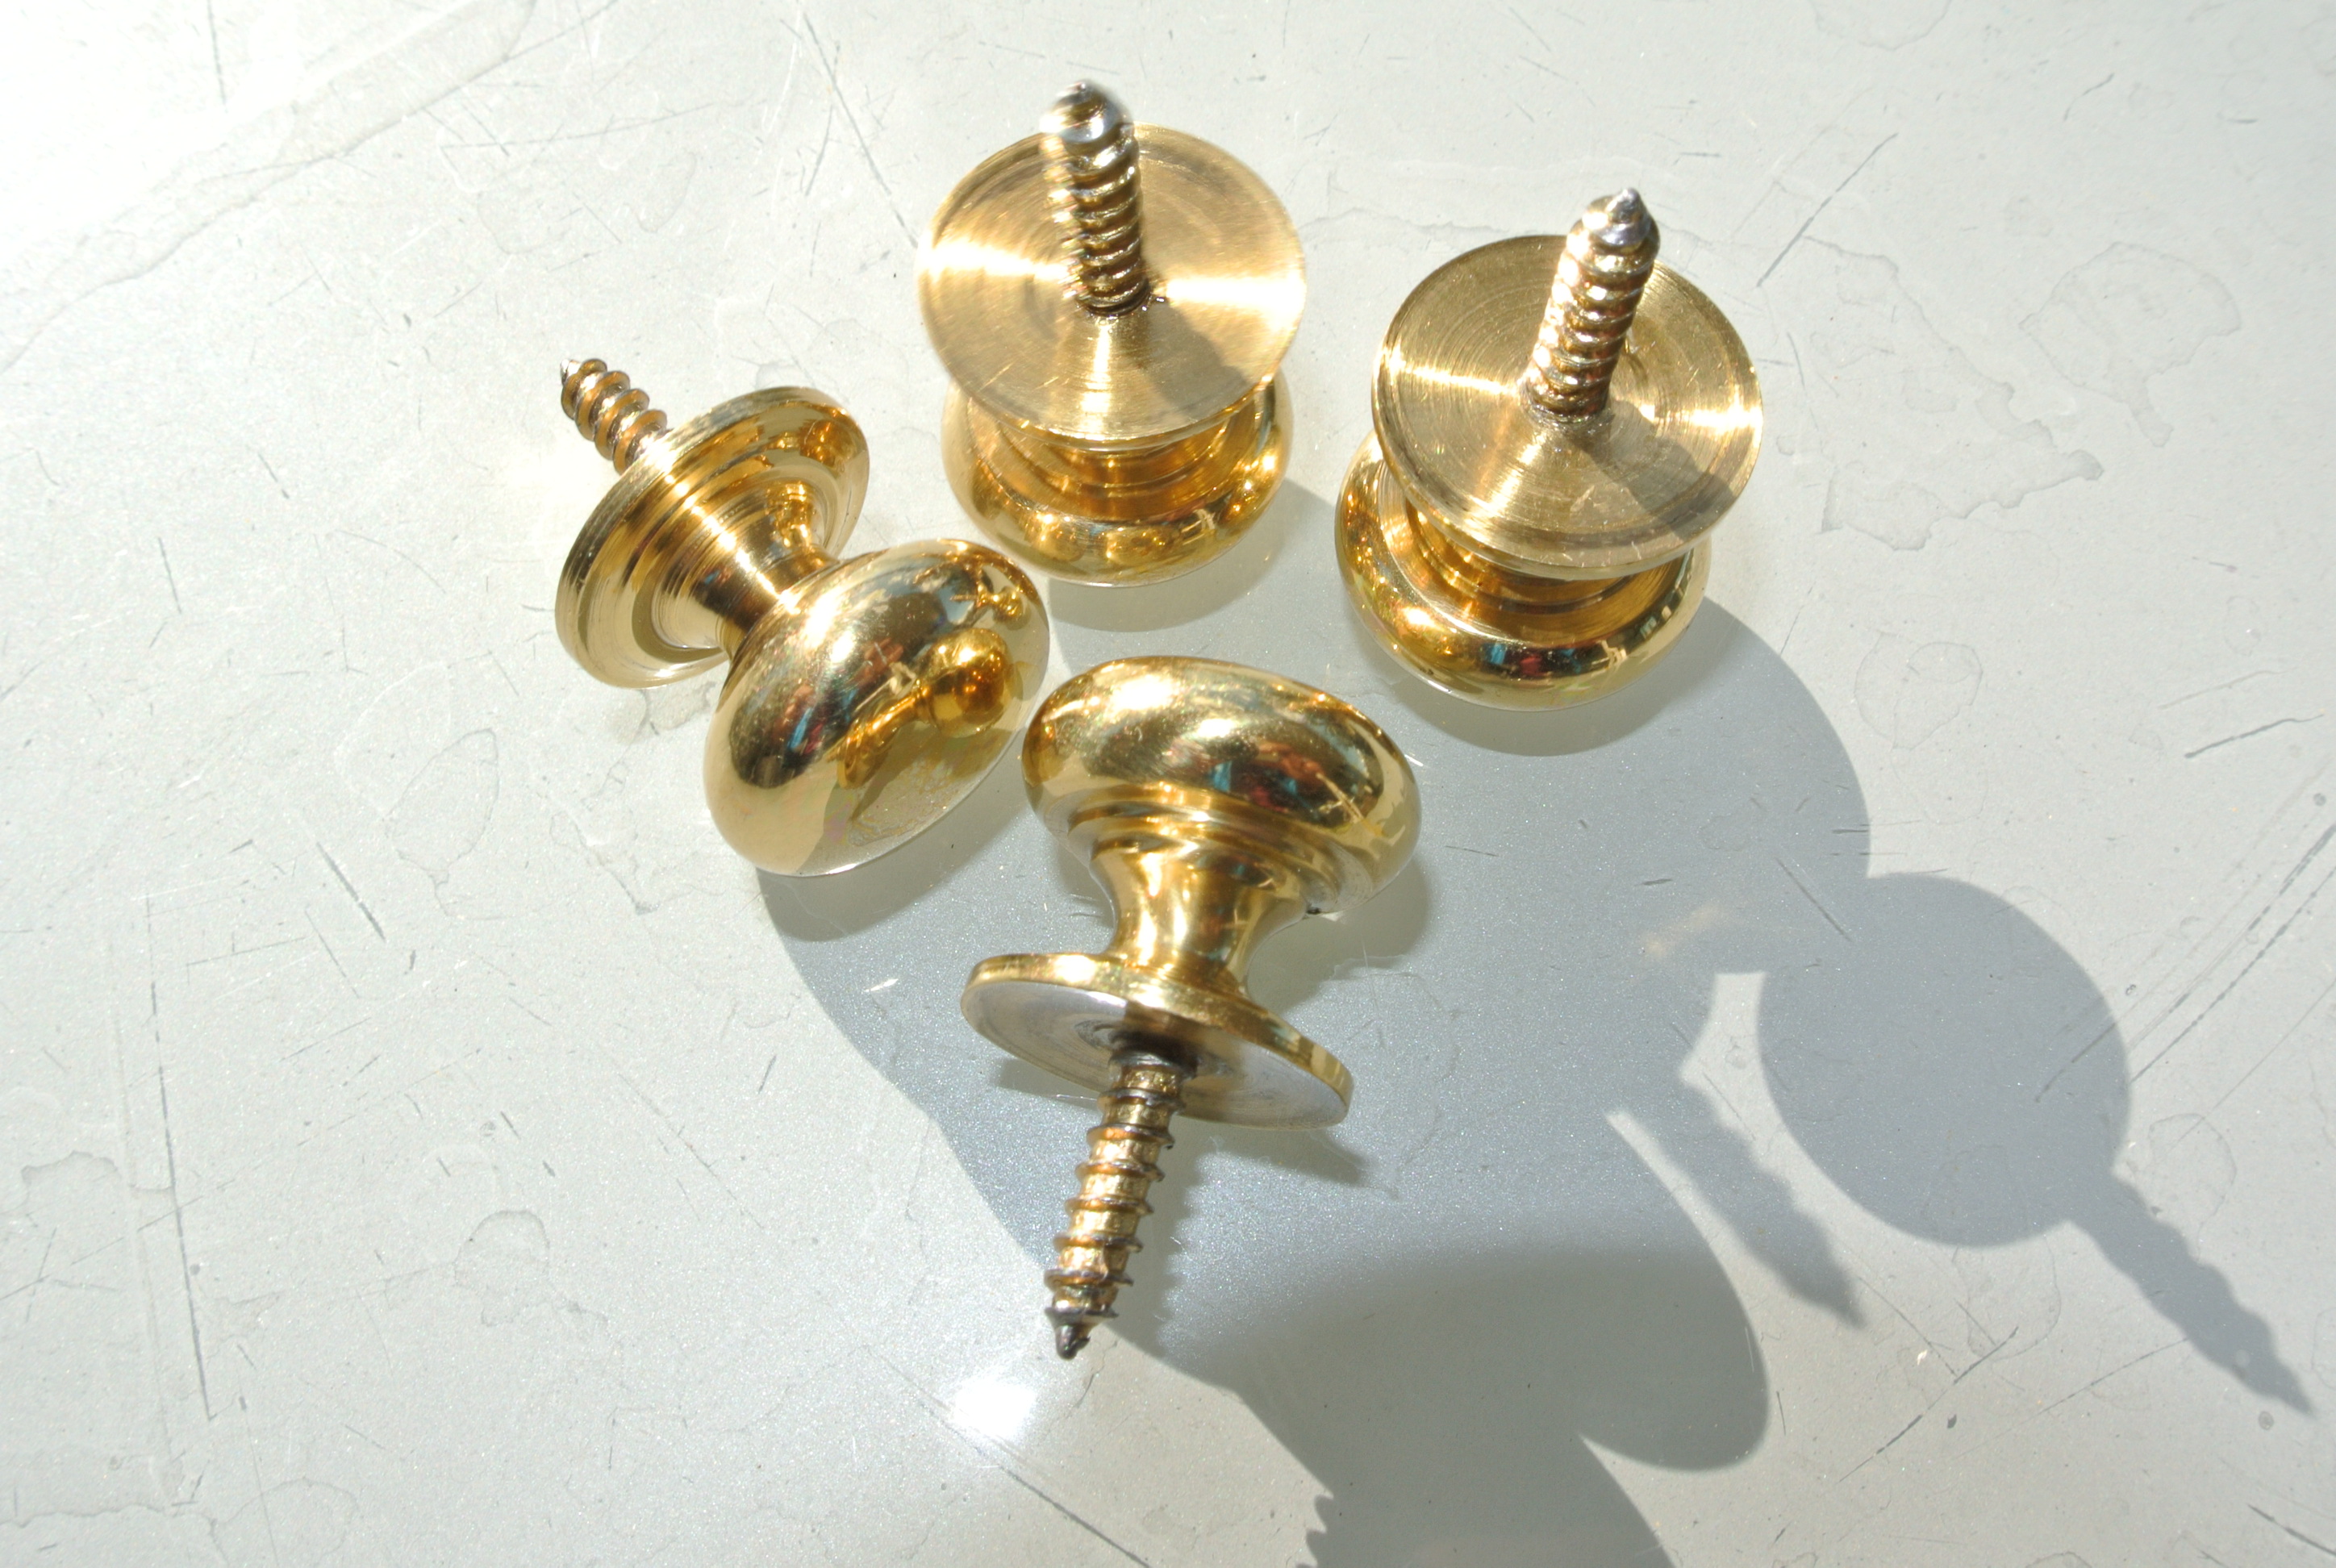 4 Very Small Screw Knobs Pulls Handles Antique Solid Heavy Brass